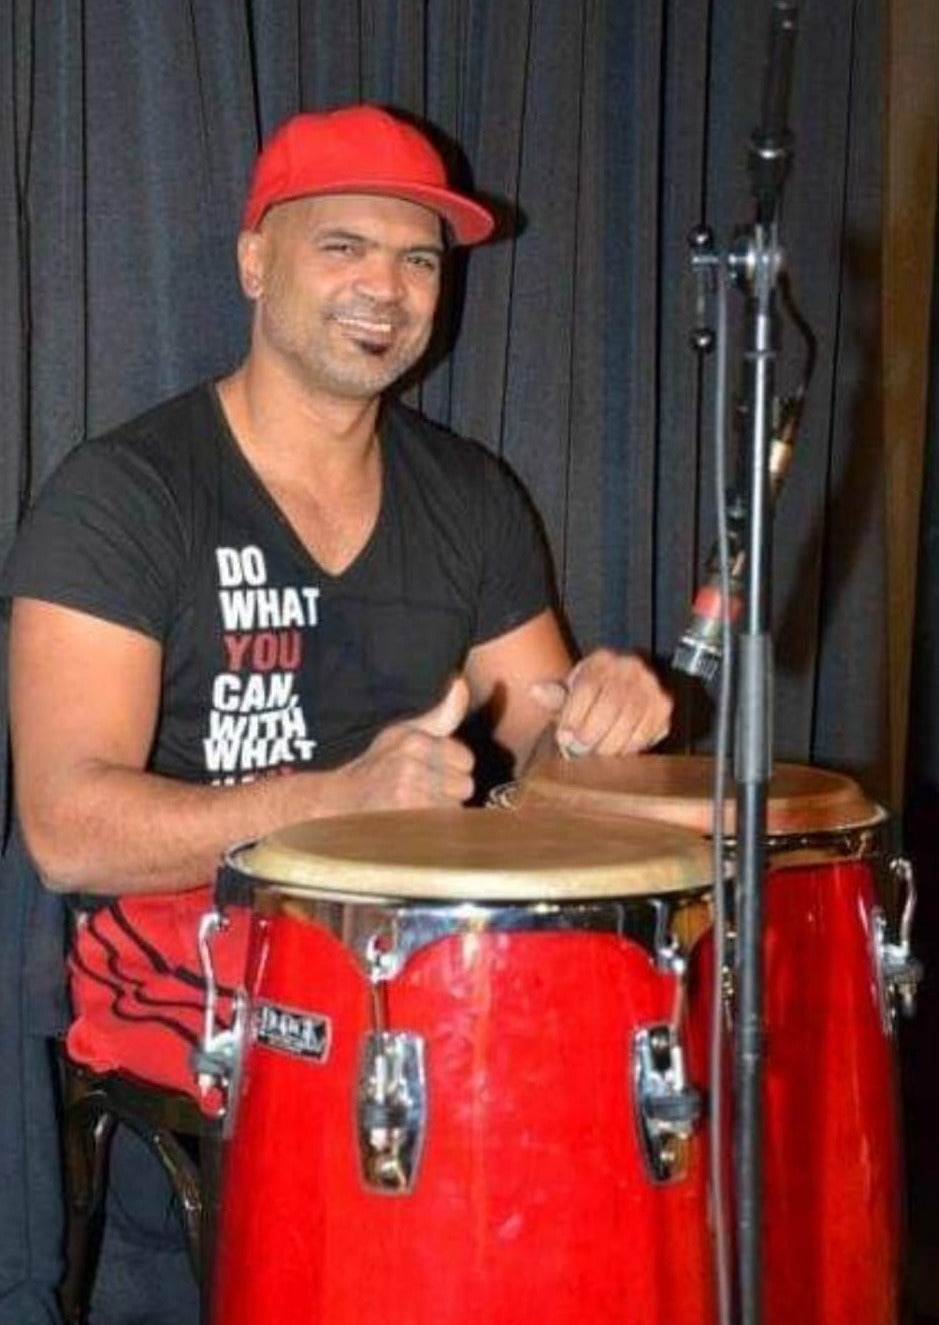 Percussion Workshop "Cuban Rhythms" for Beginners with Adan in Hamburg, Germany by subcultours